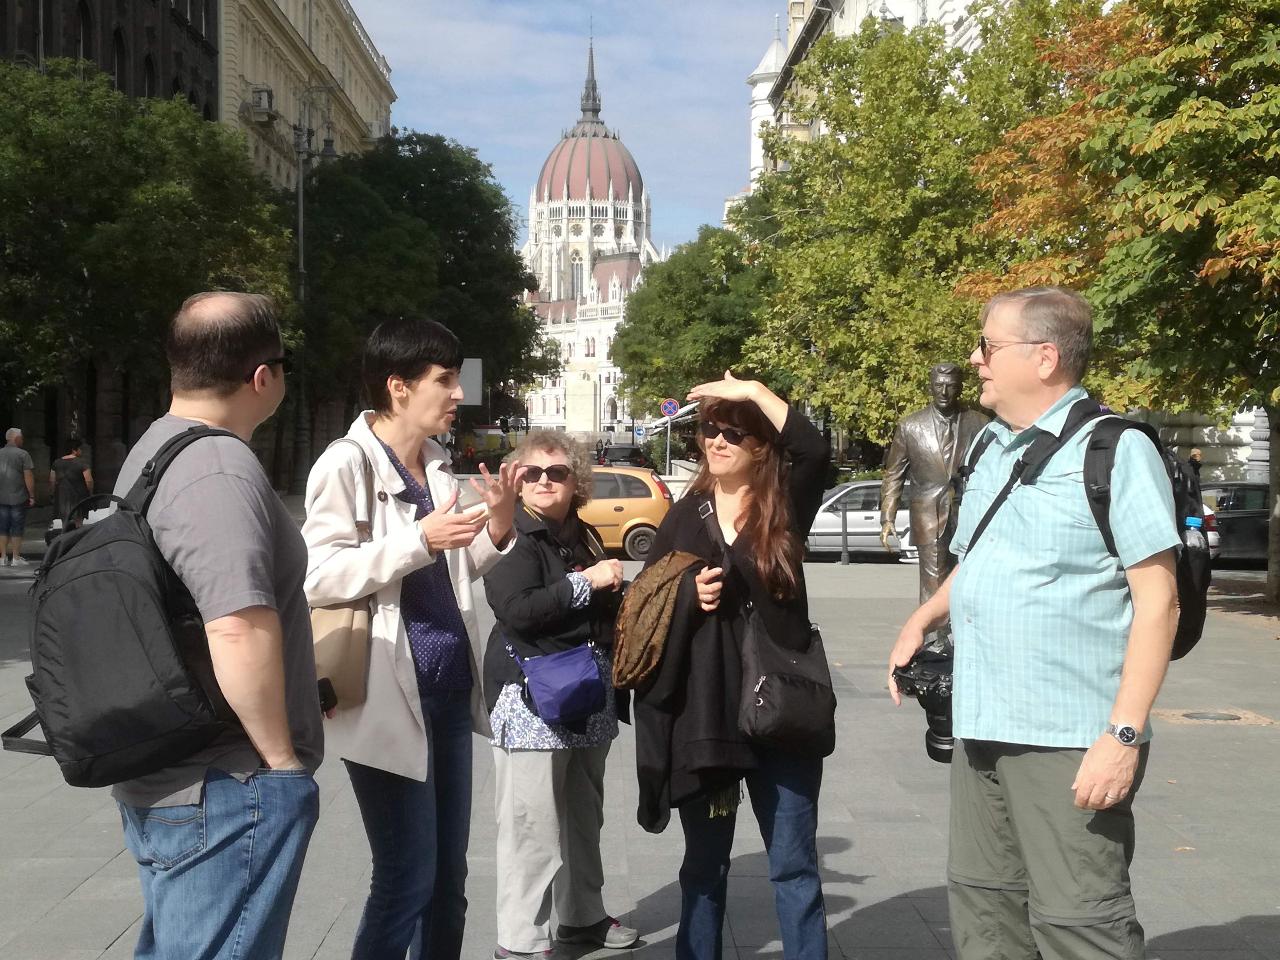 Communist Budapest Small Group Tour - 3 hours